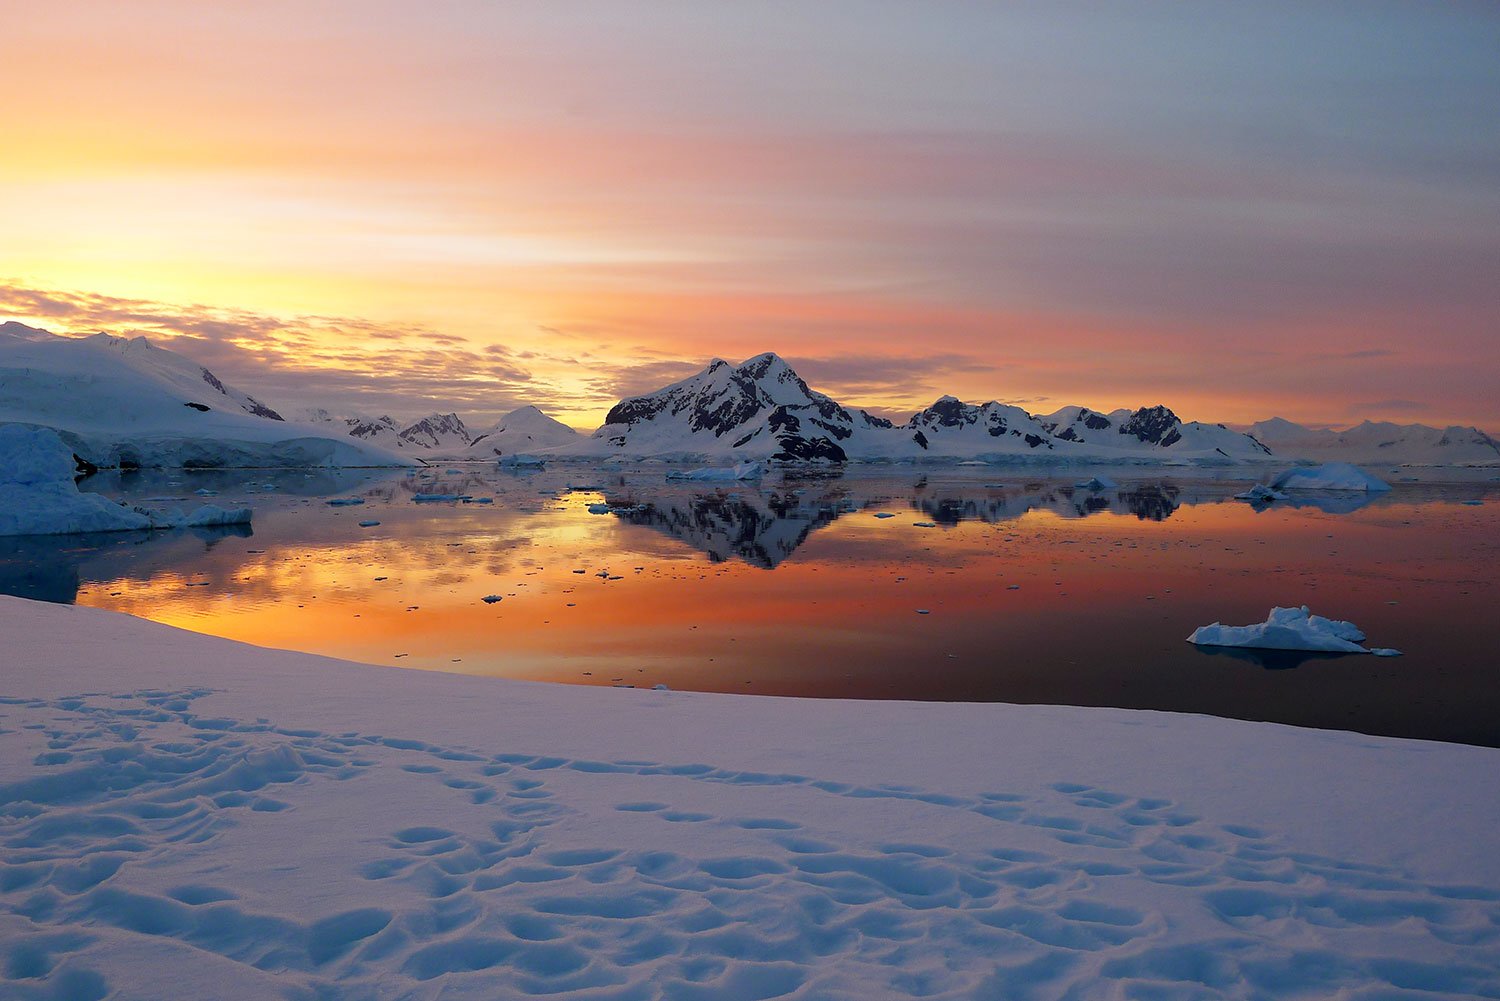 The sun sets over Leith Cove, Antarctica, setting the sky alight with spectacular hues of pink, orange and red.